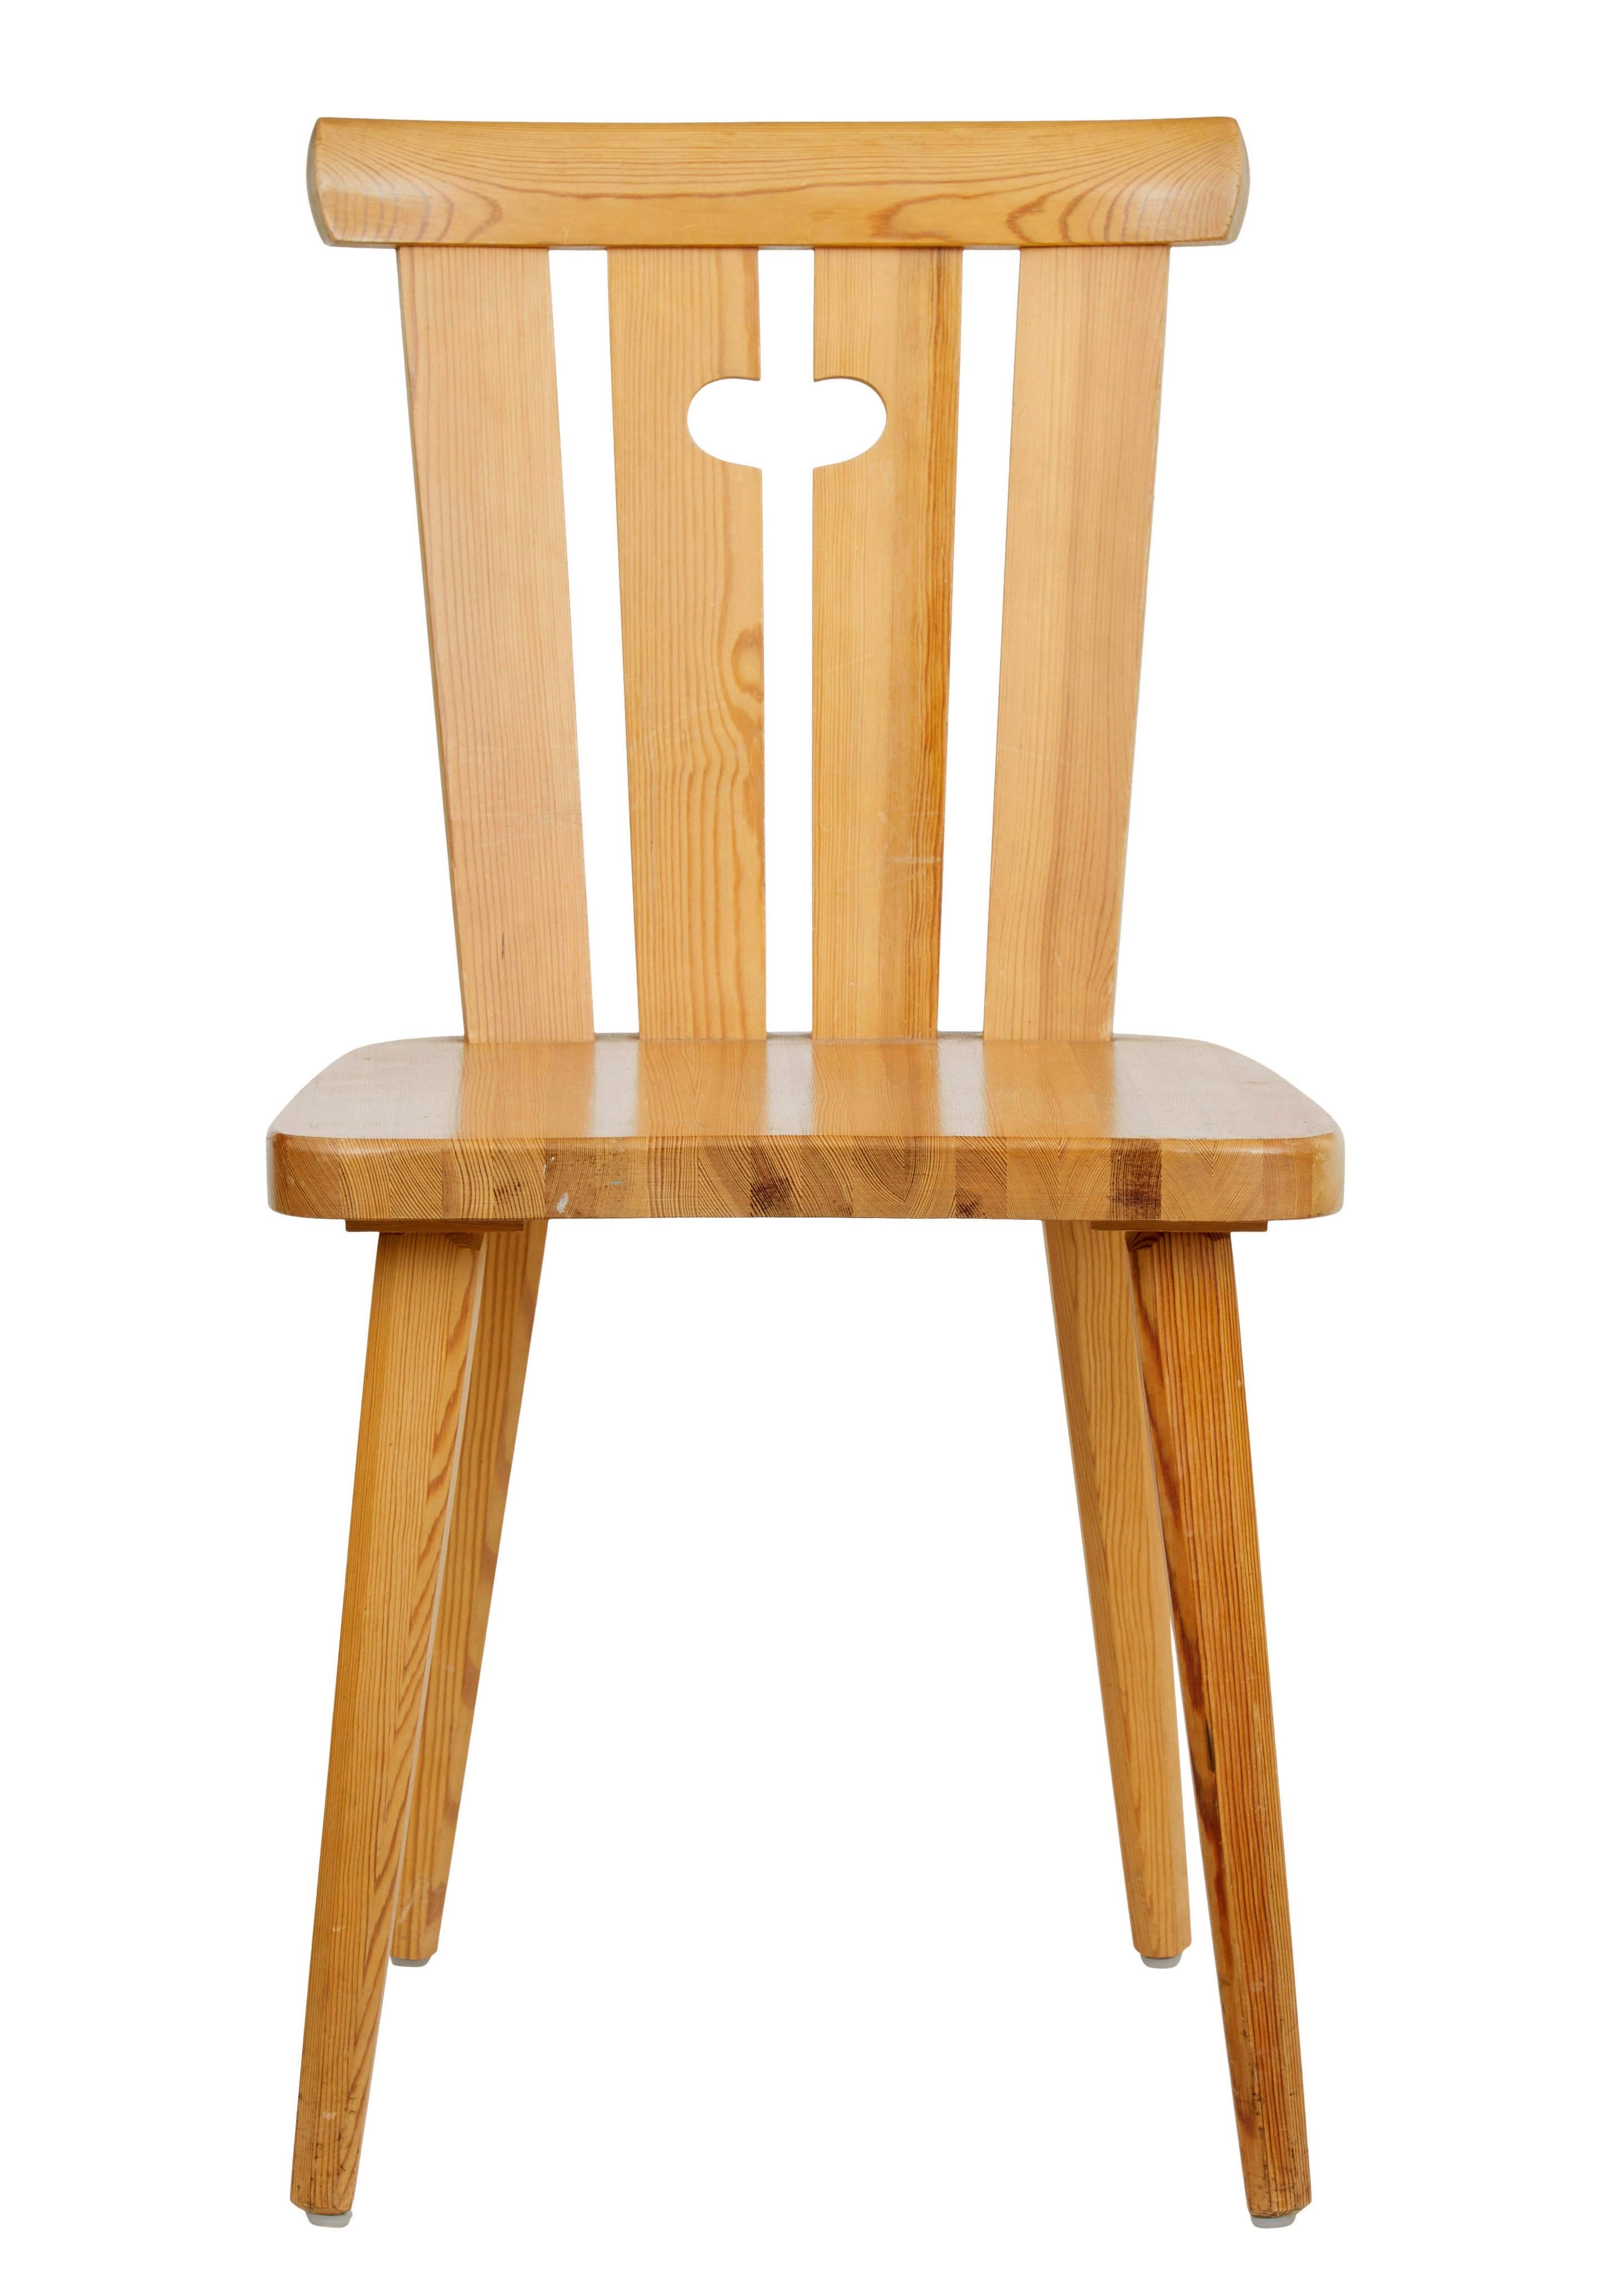 Practical set of Swedish 1970's dining chairs.

Shaped backs with 4 back slats with a carrying handle cut out. Plain seat, standing on tapered legs.

Simple elegant design and comfortable.

Good rich pine color. Expected surface marks from use,